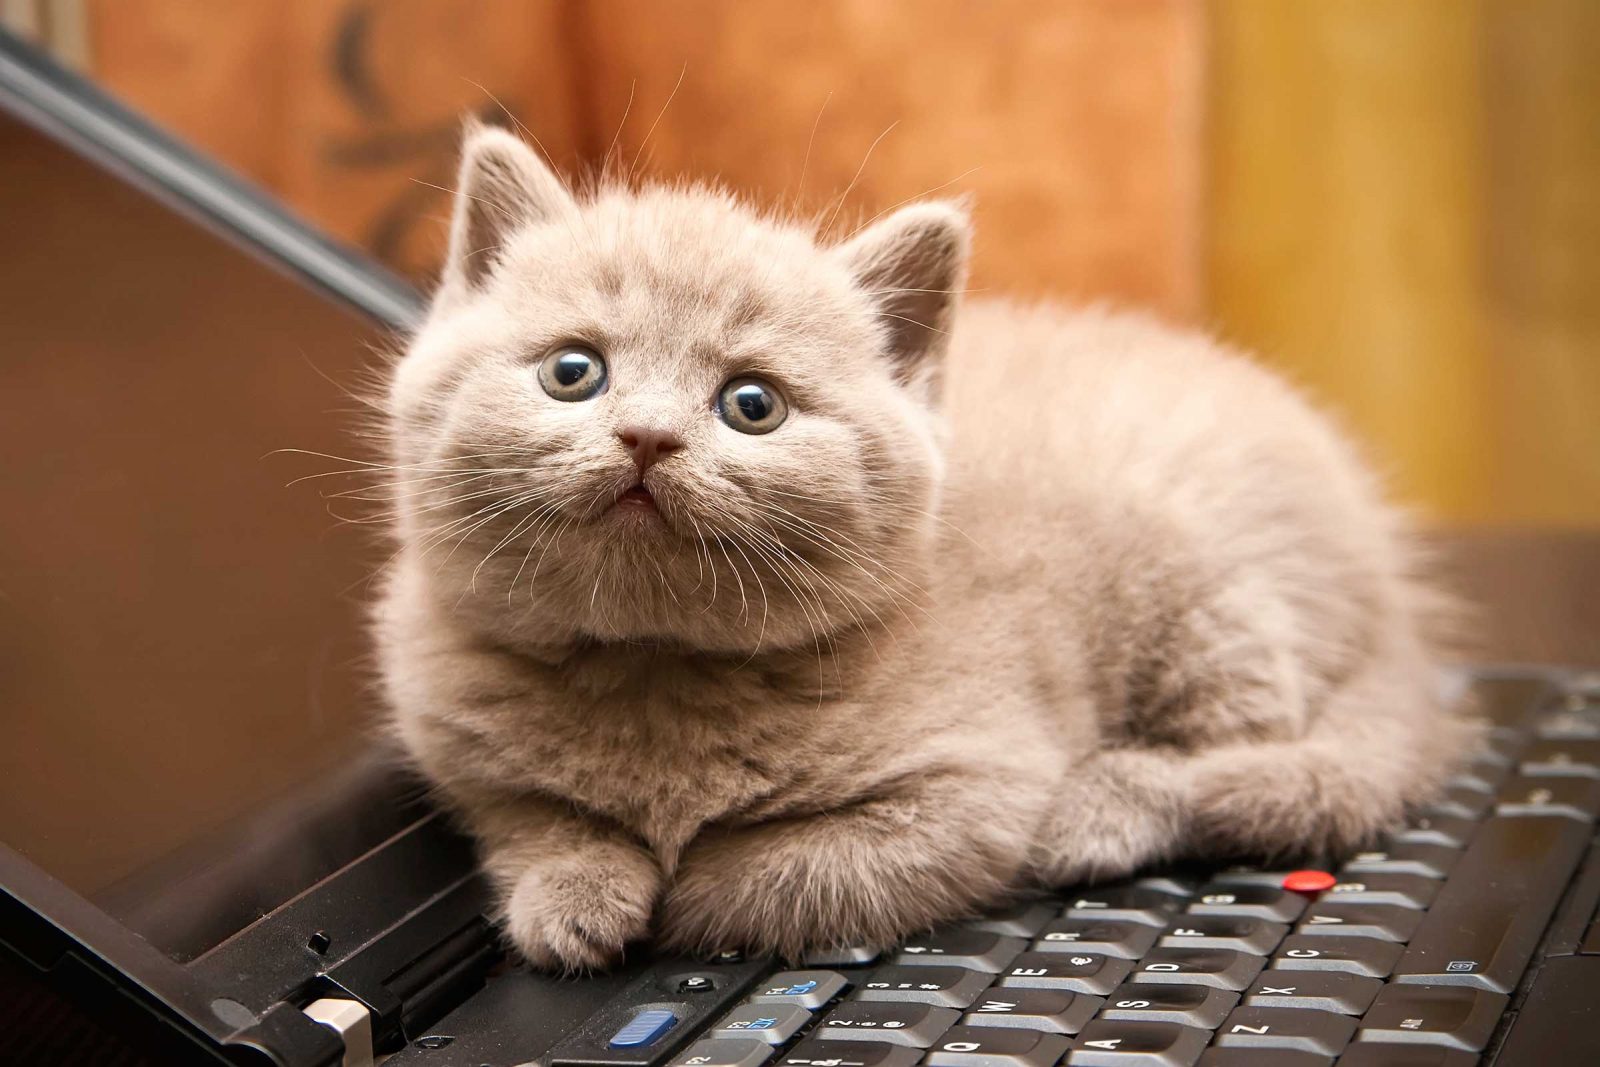 😺 How Much of a Cat Person Are You? Cat Kitten On Laptop Computer